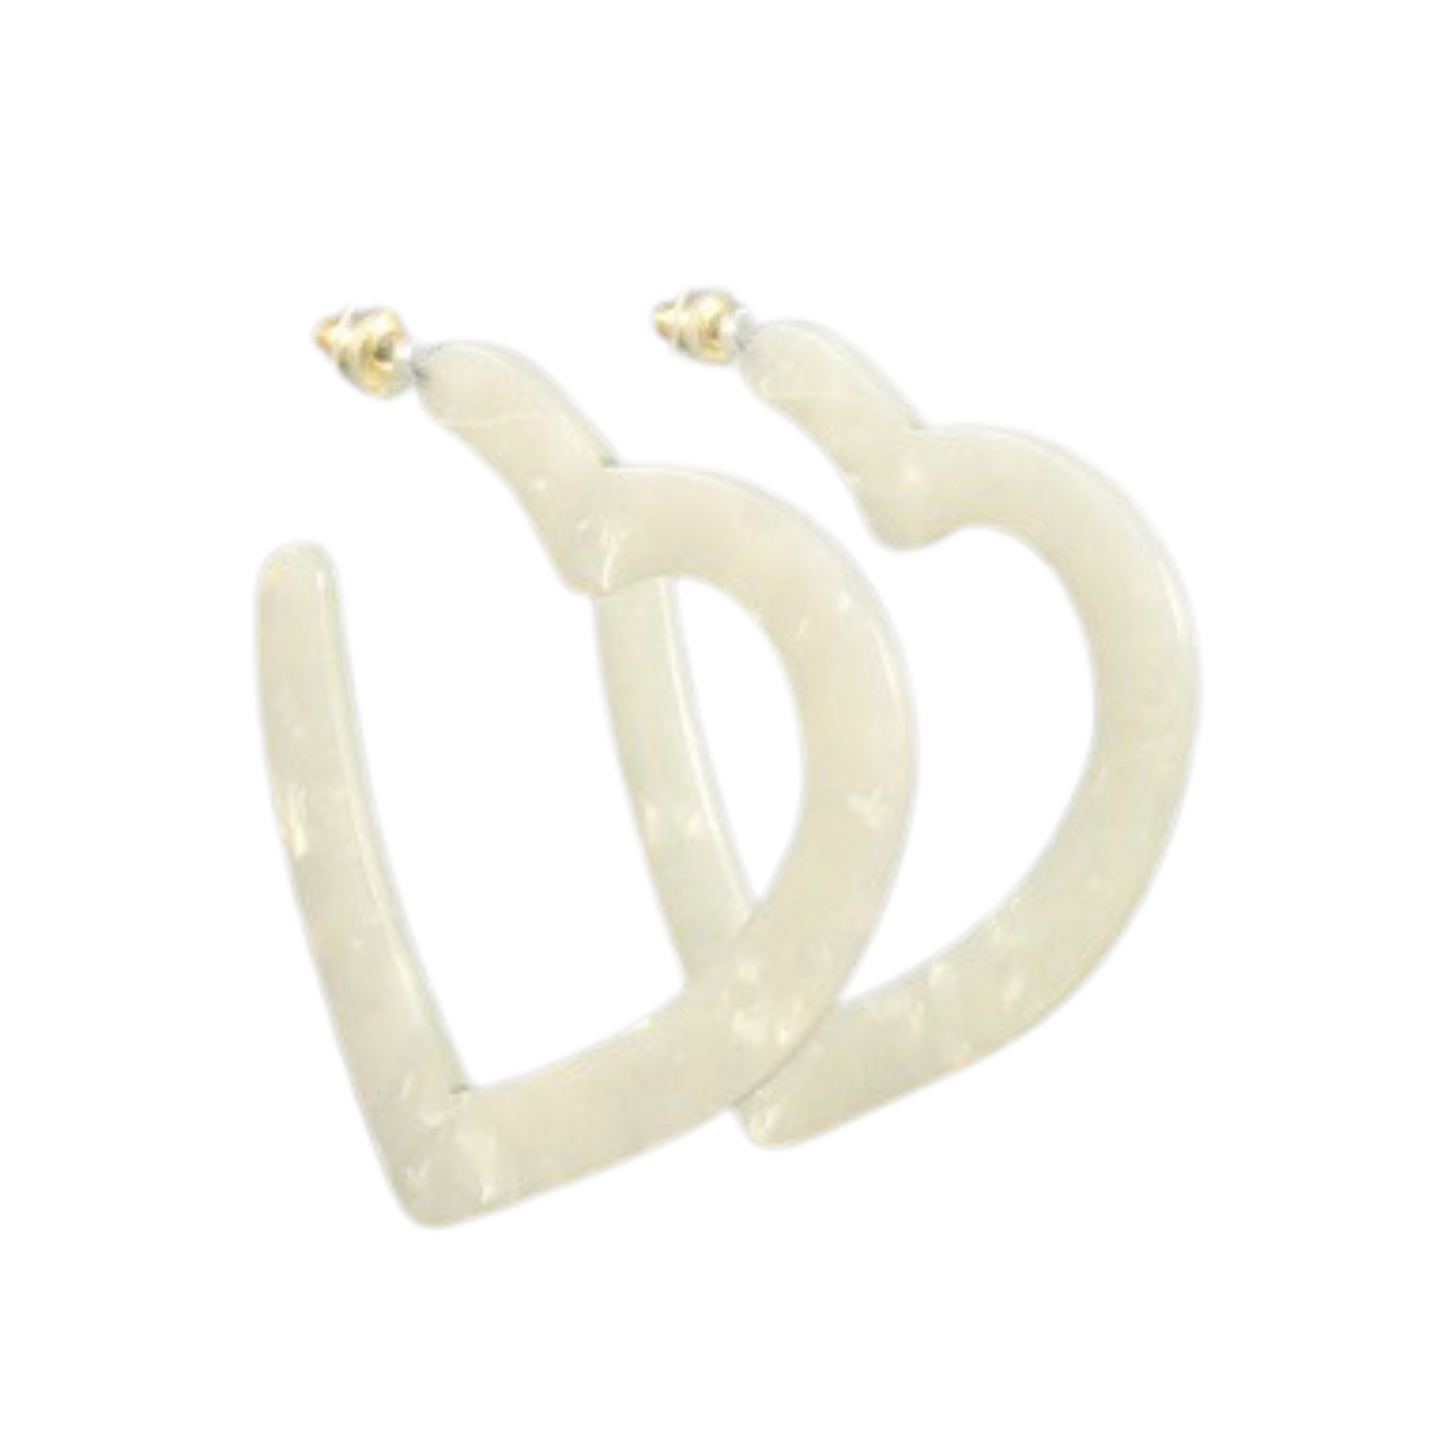 Upgrade your jewelry collection with these elegant Heart Shaped Hoops. Made with ivory acrylic, these unique hoop earrings are shaped like hearts, adding a touch of romance to any outfit. Perfect for everyday wear or a special occasion, these hoops are a must-have for any fashion-forward individual.